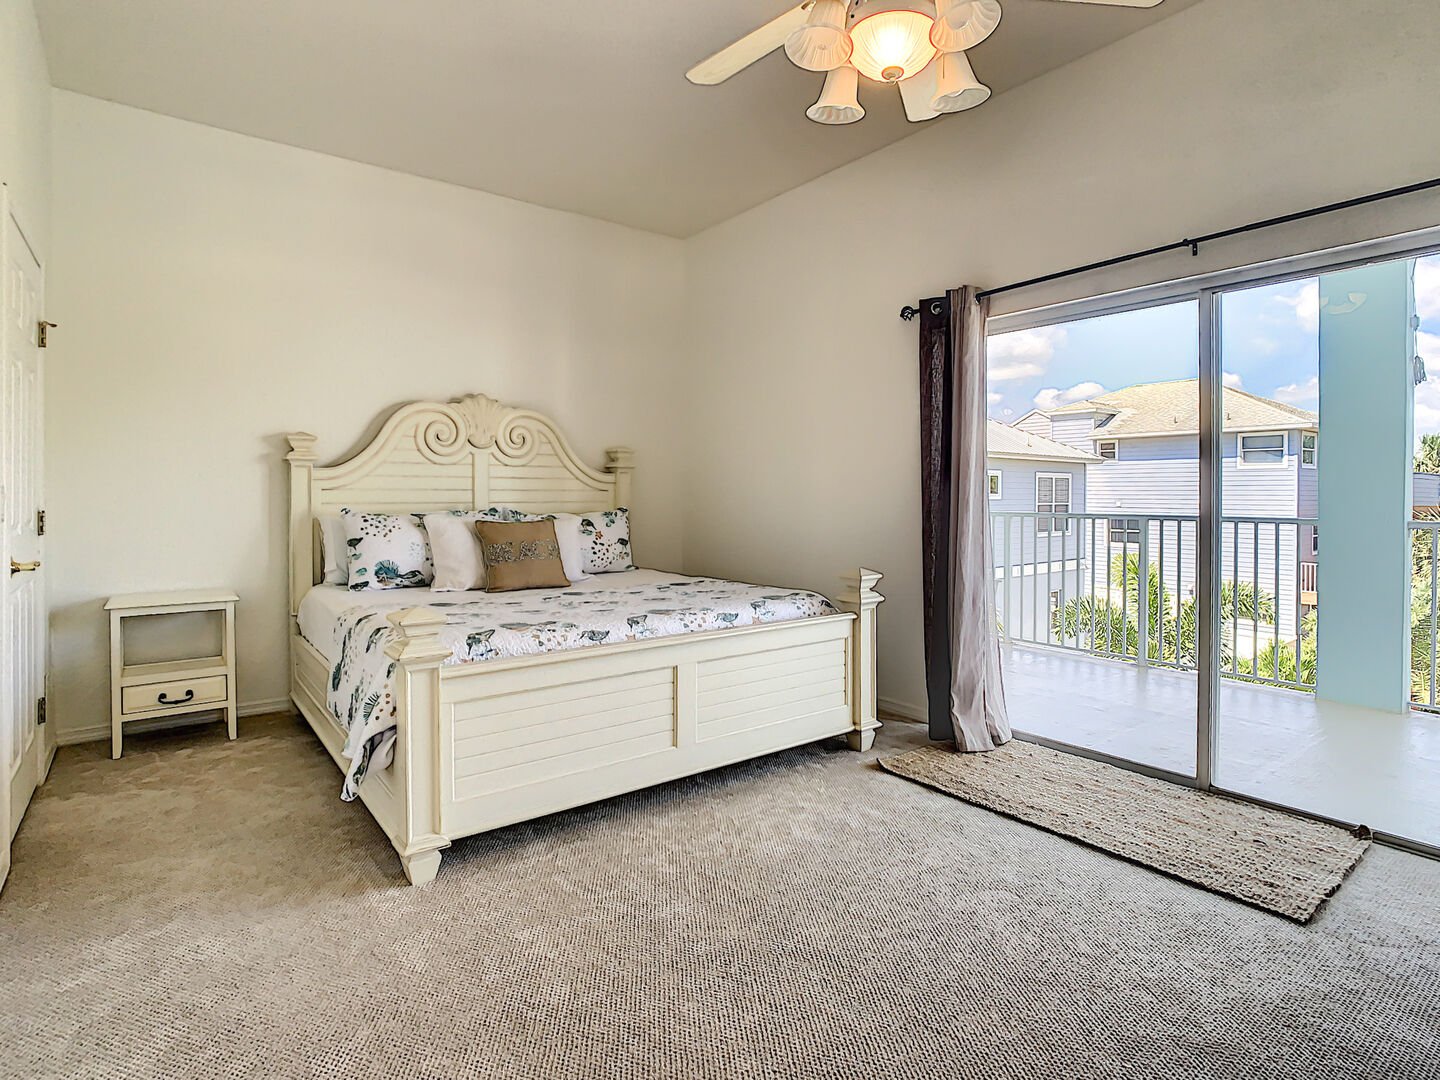 Master bedroom with king size bed and sliders to the balcony overlooking pool area.